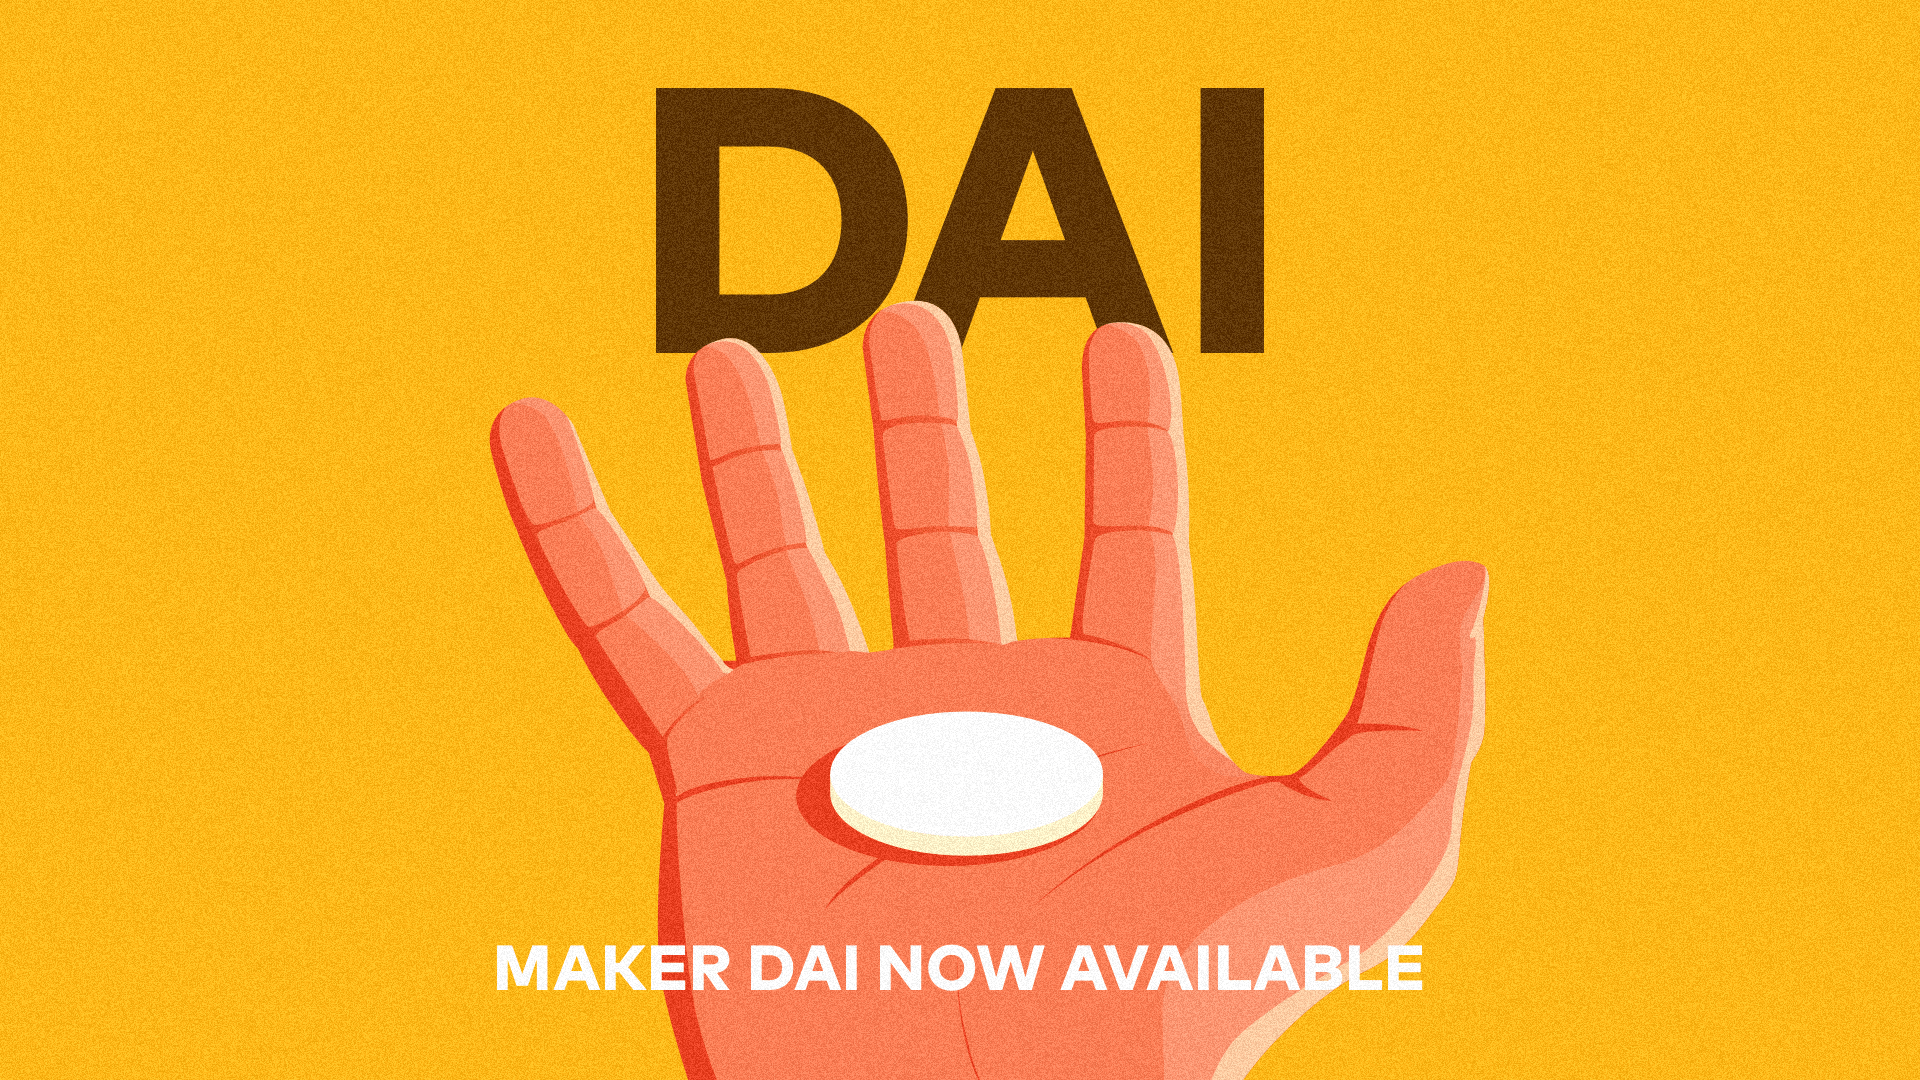 DAI is now available for trading on CoinJar!